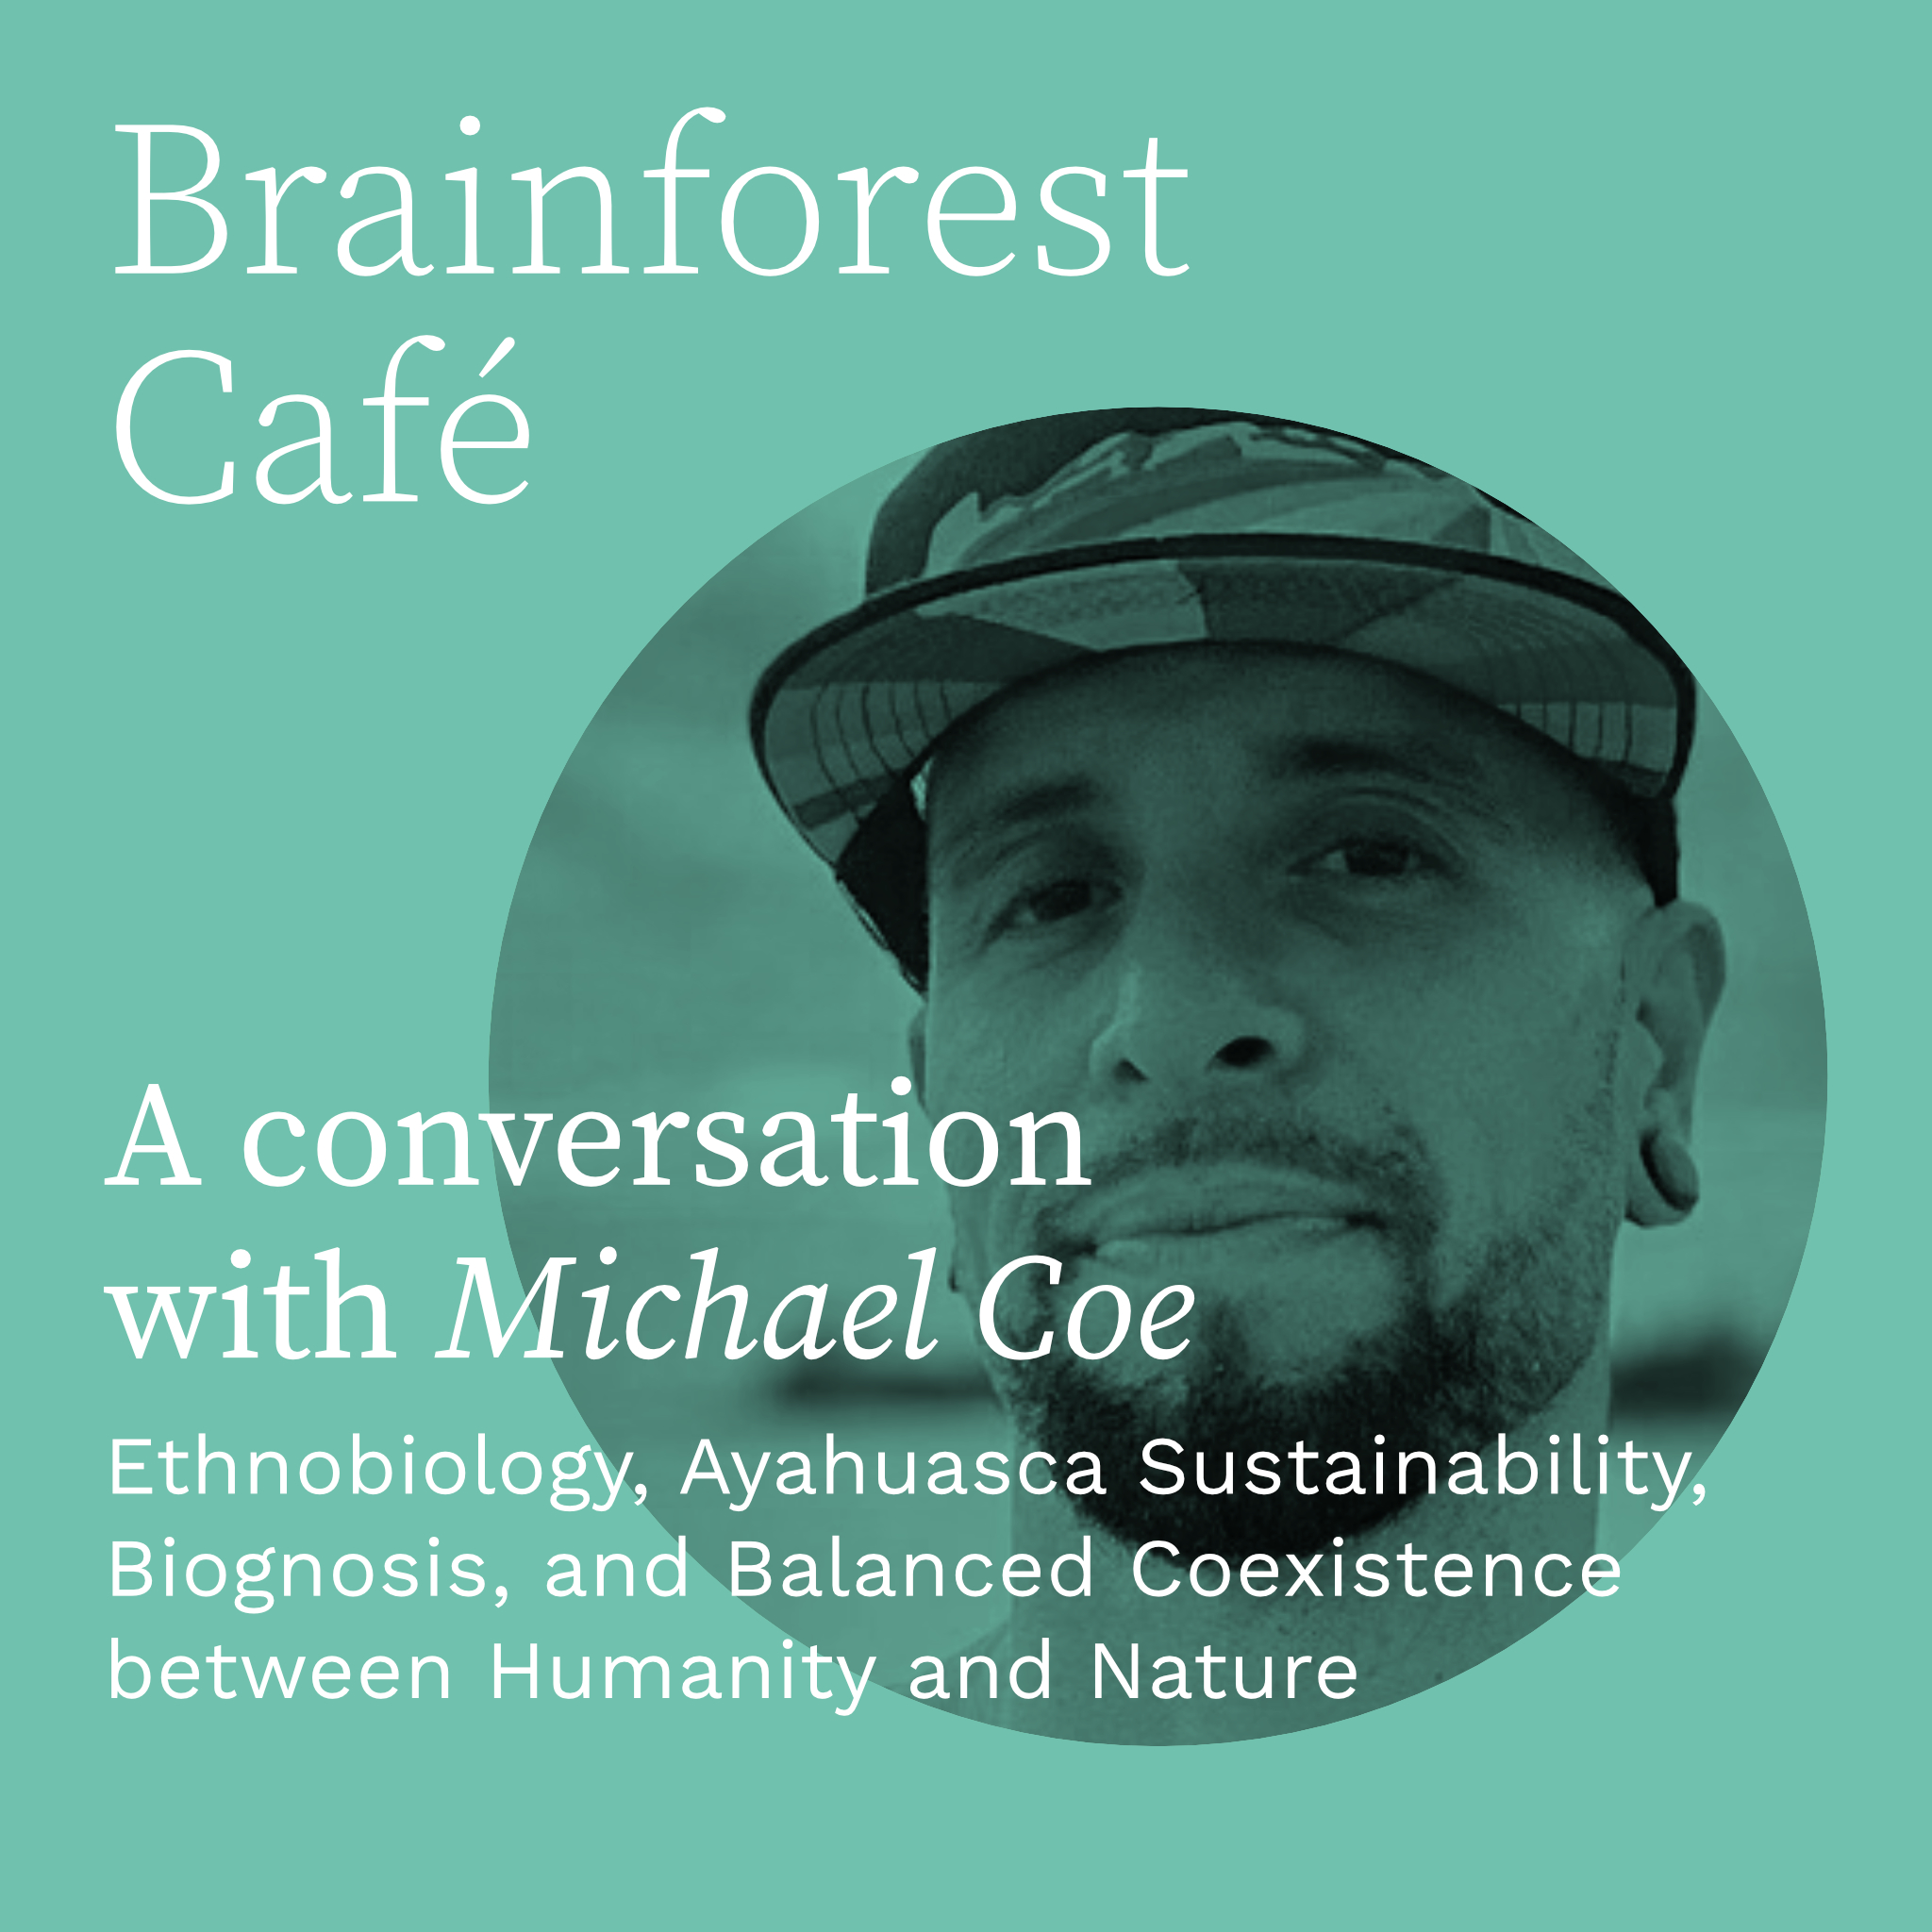 Ethnobiology, Ayahuasca Sustainability, Biognosis, and Balanced Coexistence between Humanity and Nature